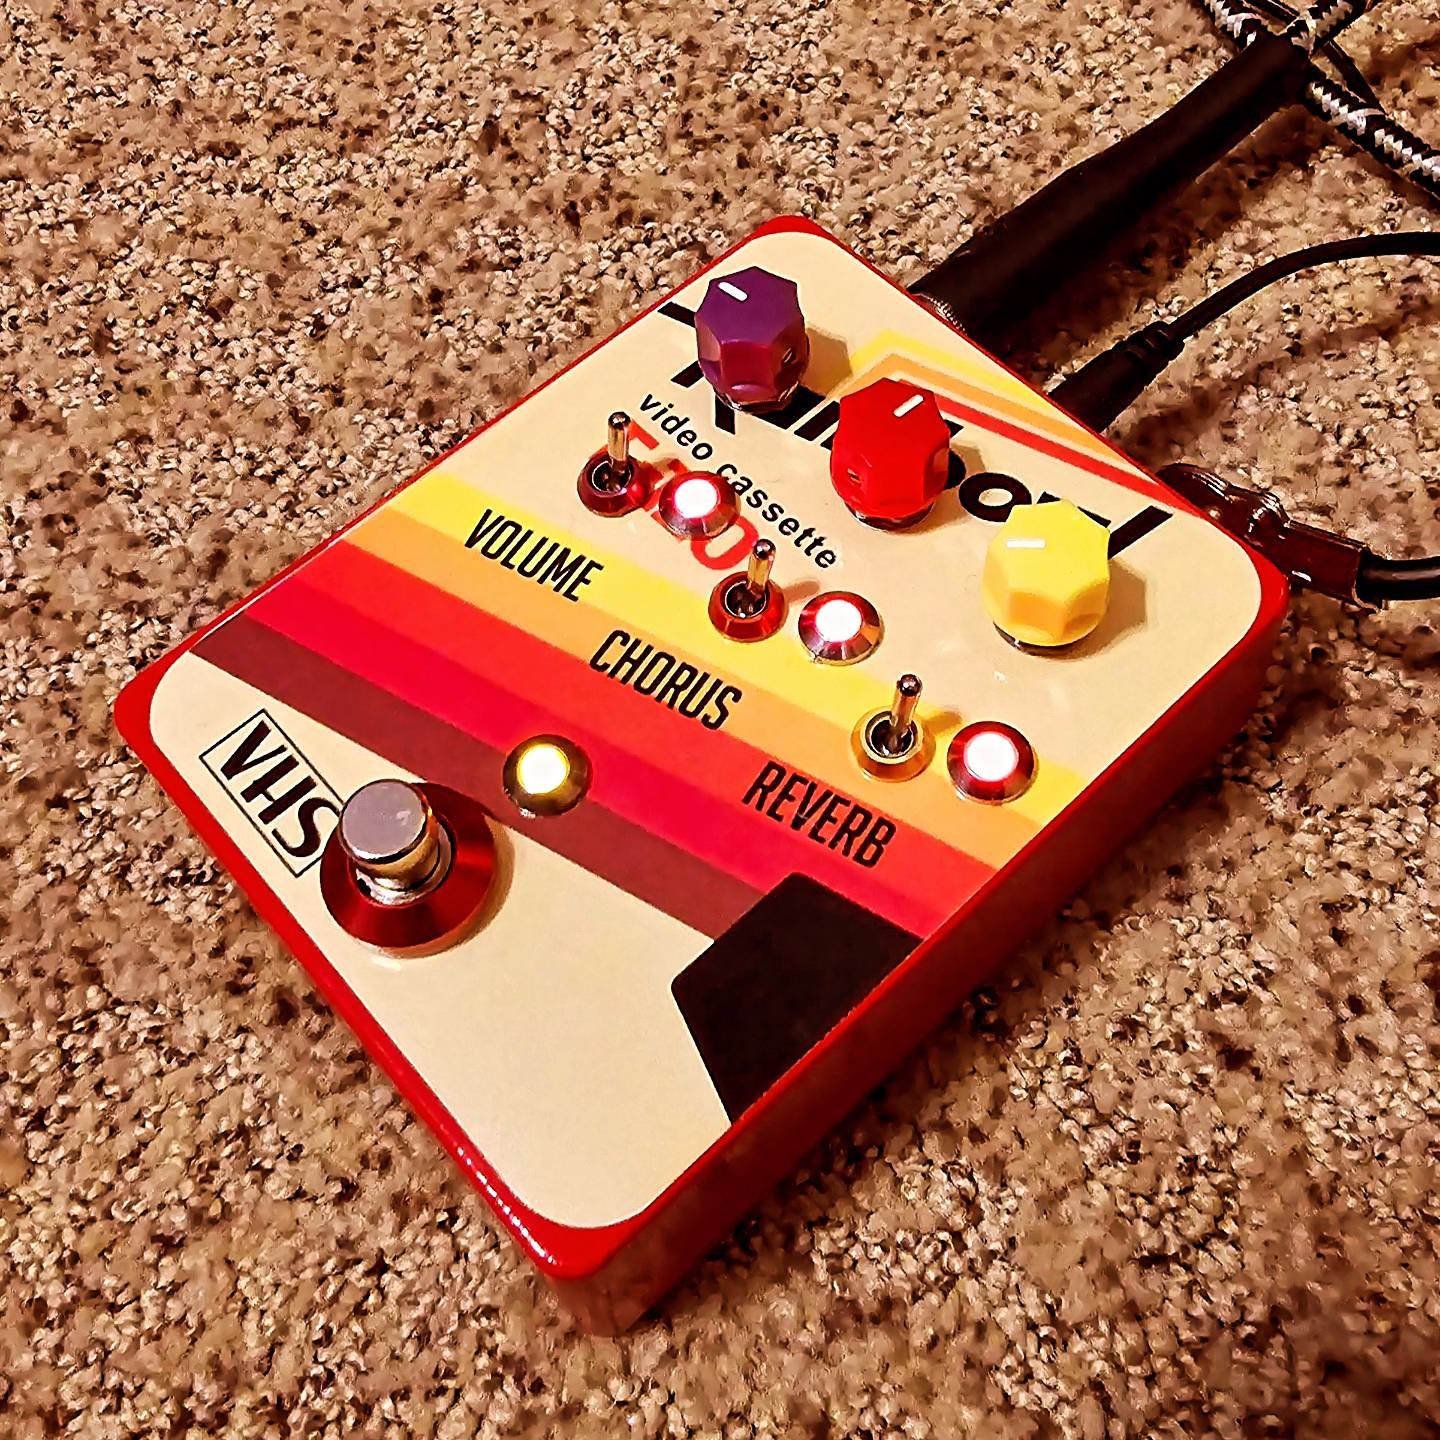 My favorite build so far! More pedal making classes coming soon!